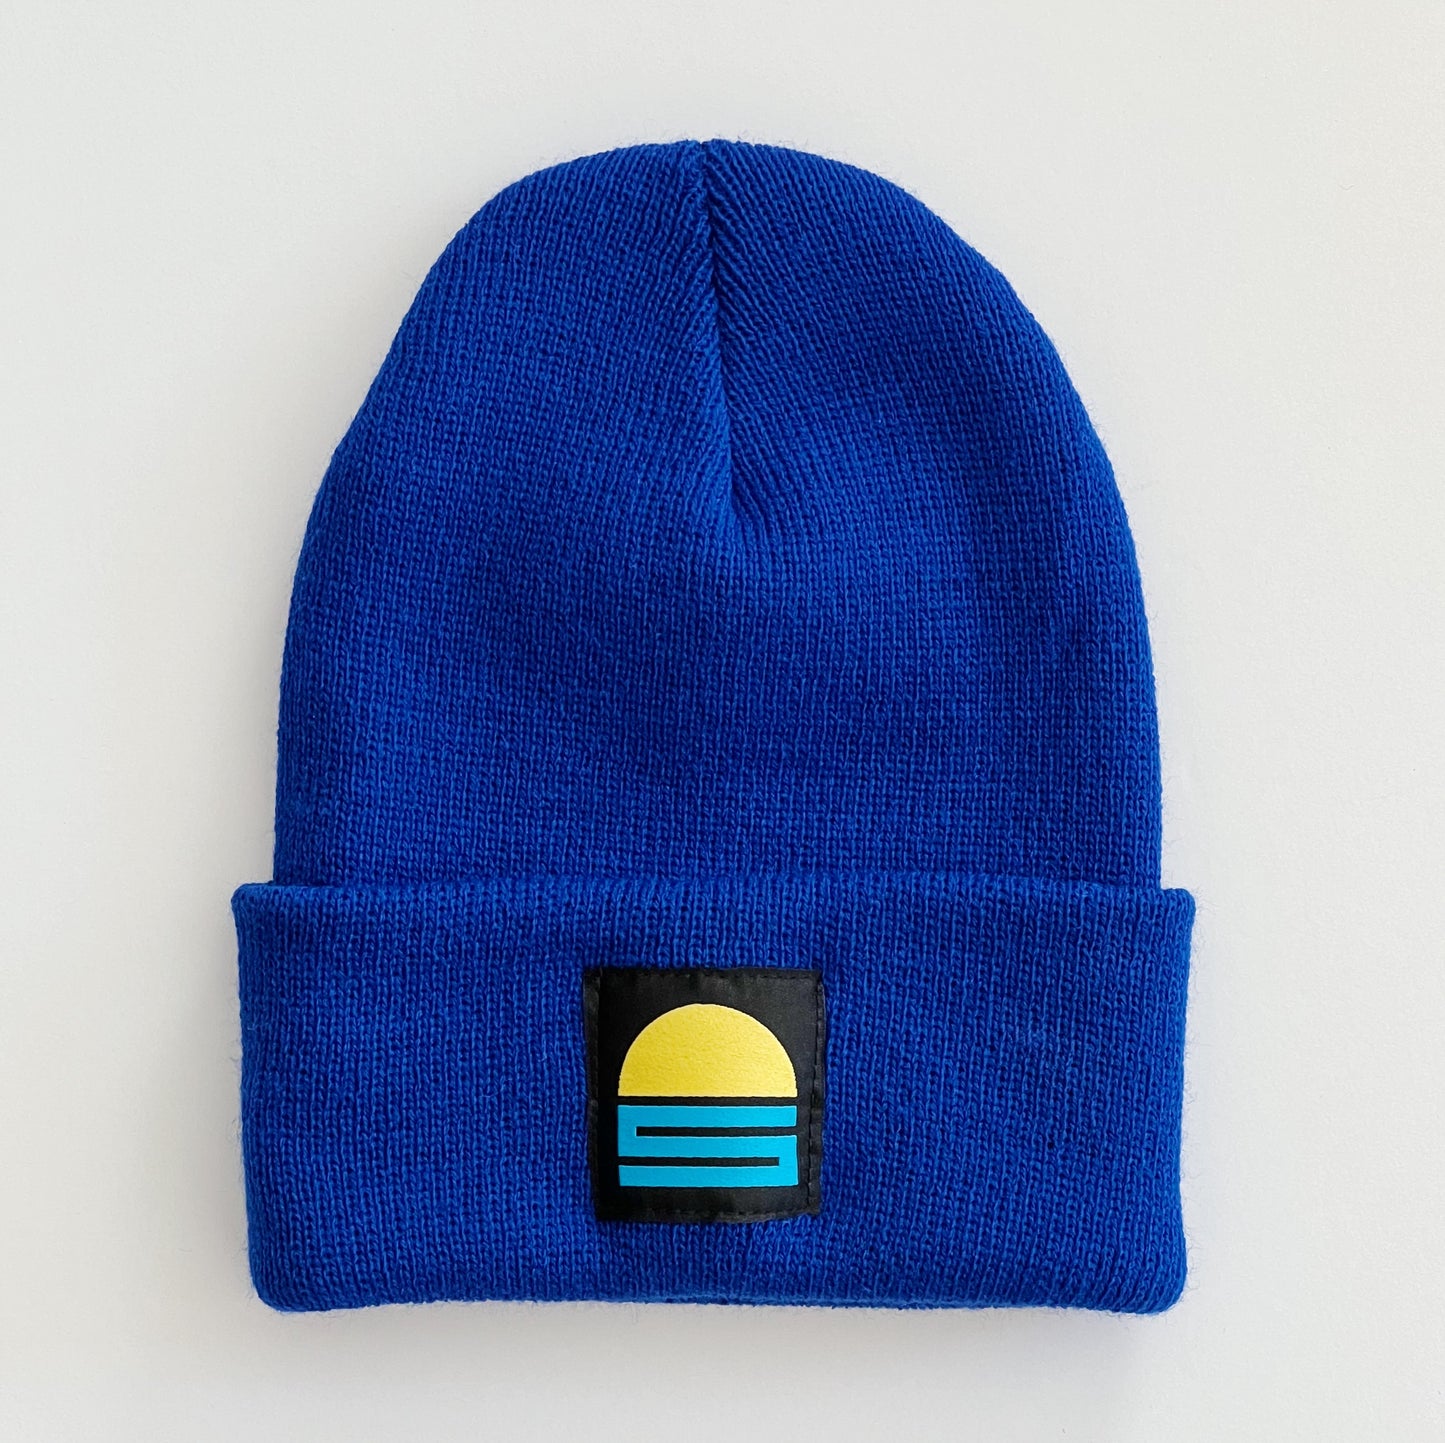 Youth Sunset Cuffed Beanie in Royal Blue